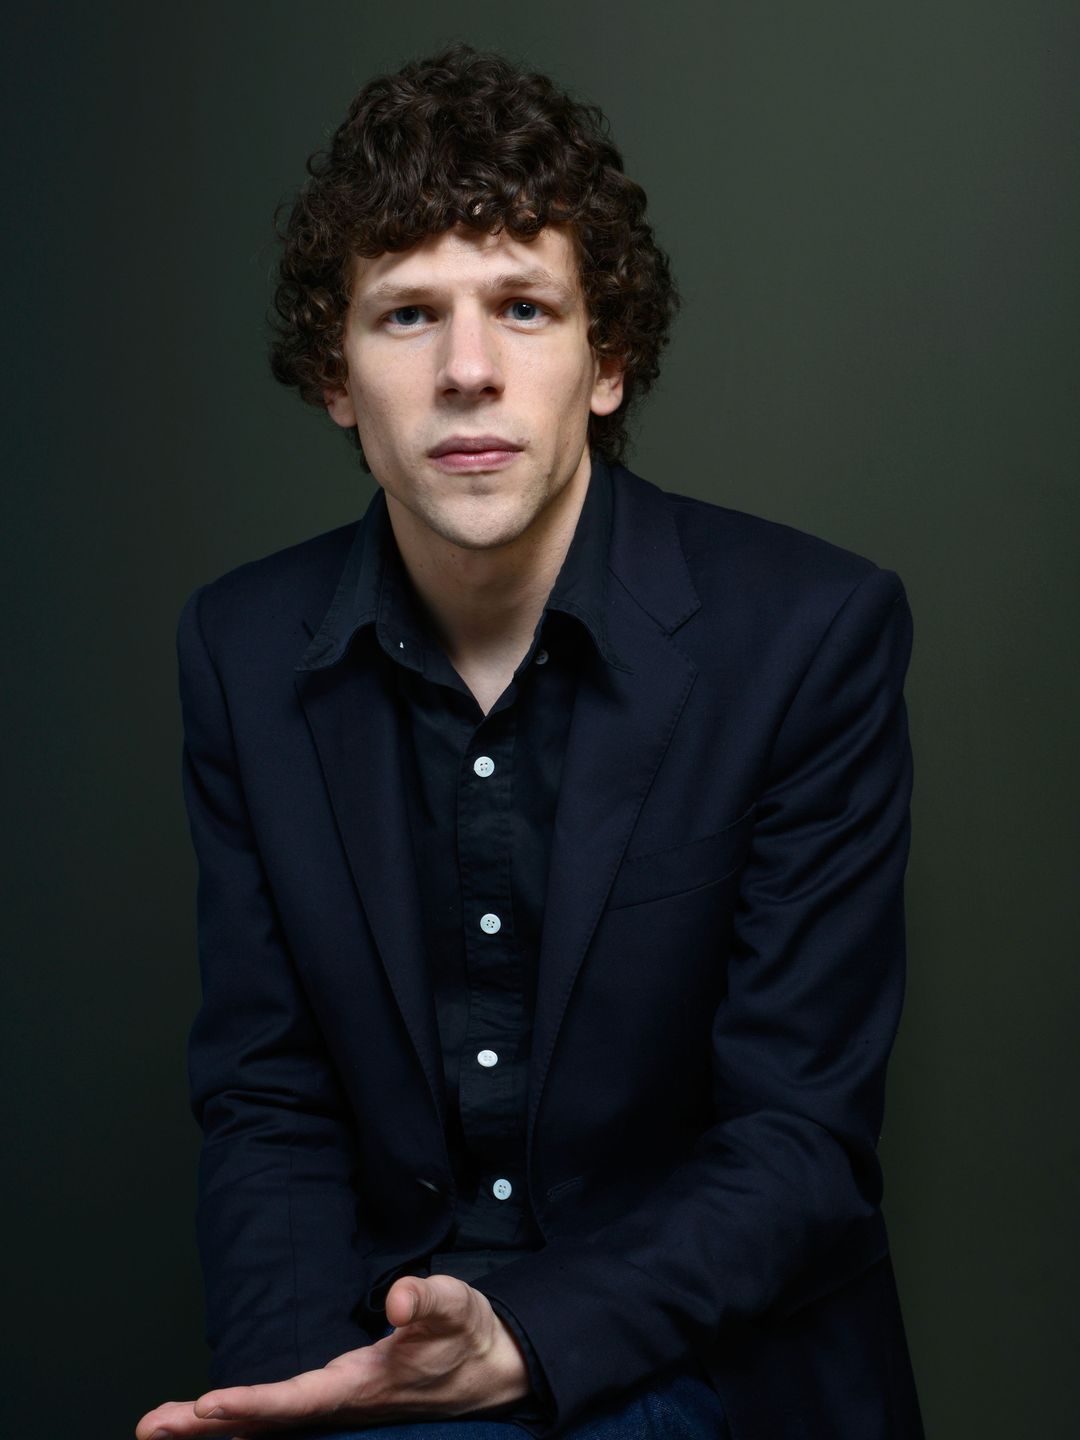 Jesse Eisenberg who is his father